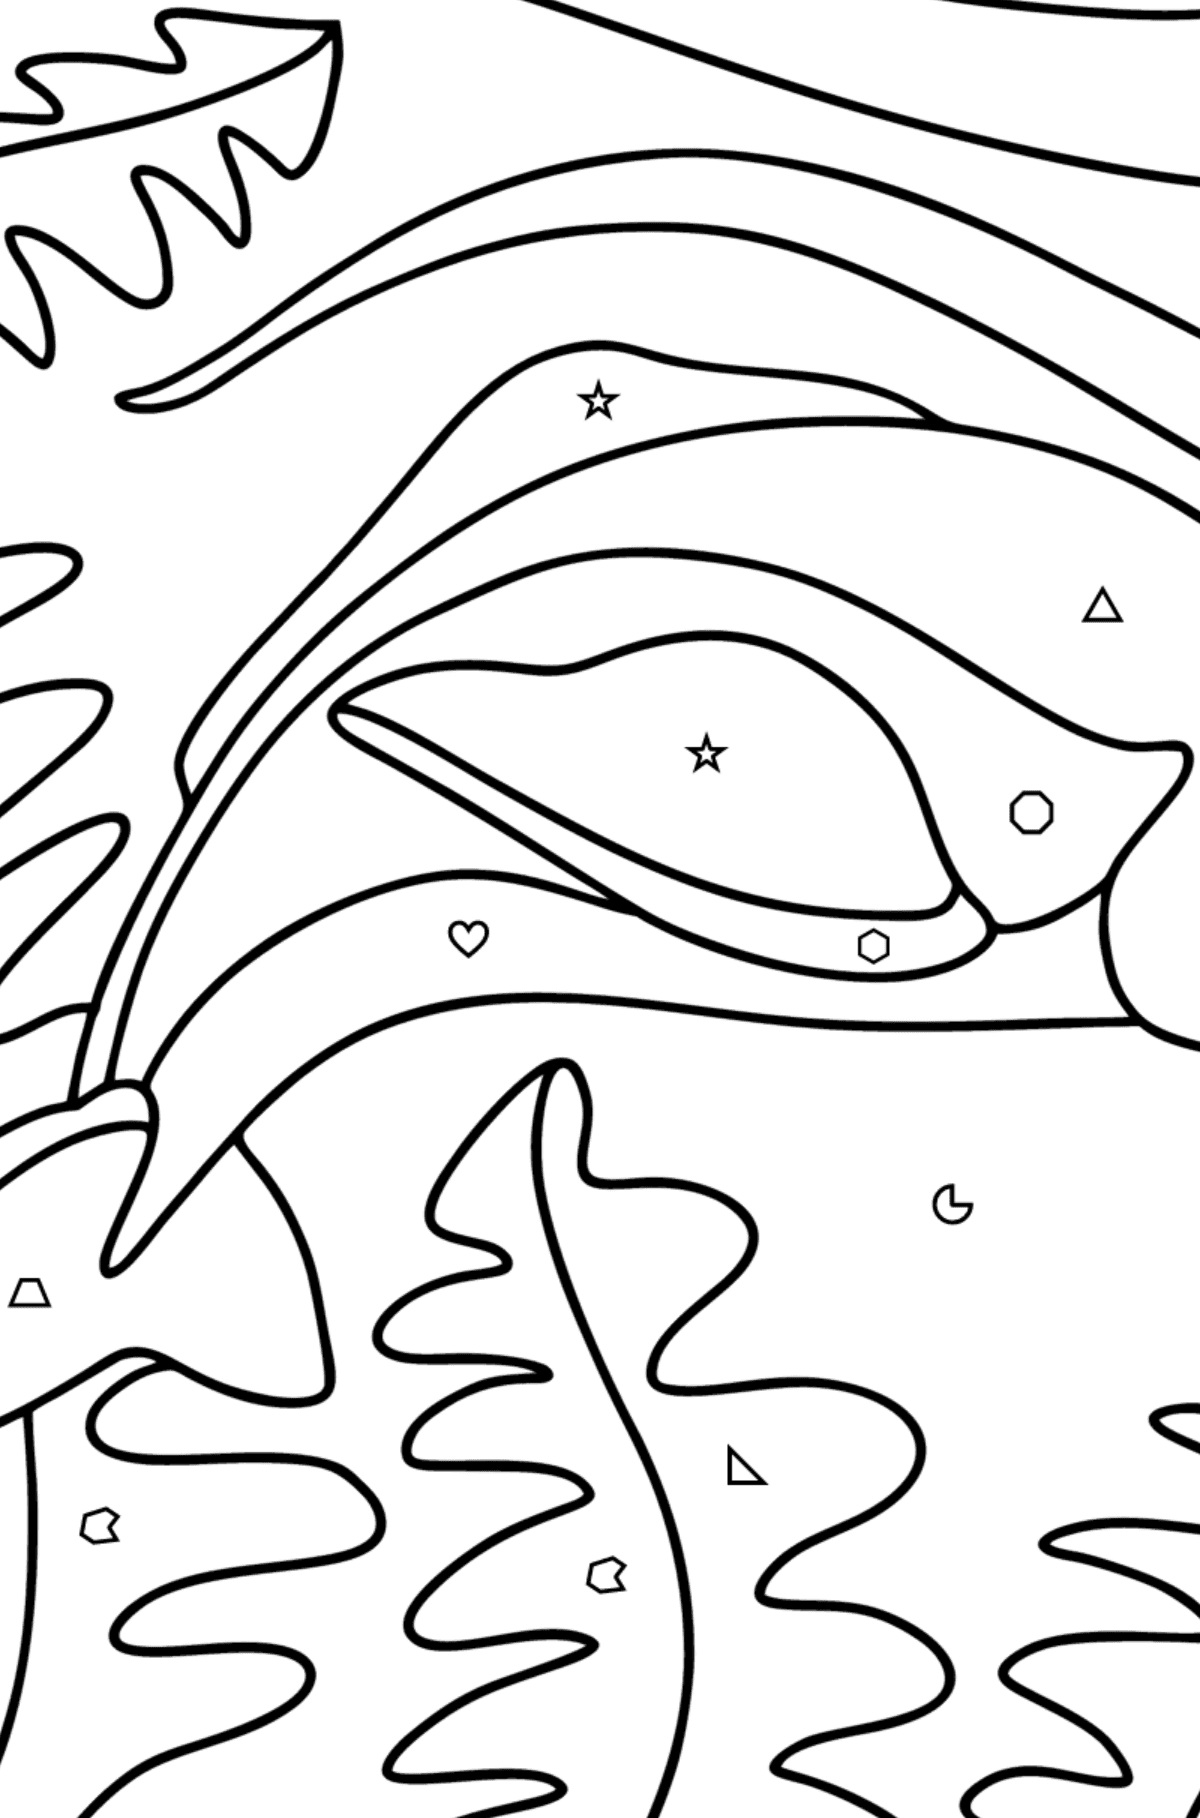 Chinese River Dolphin coloring page - Coloring by Geometric Shapes for Kids